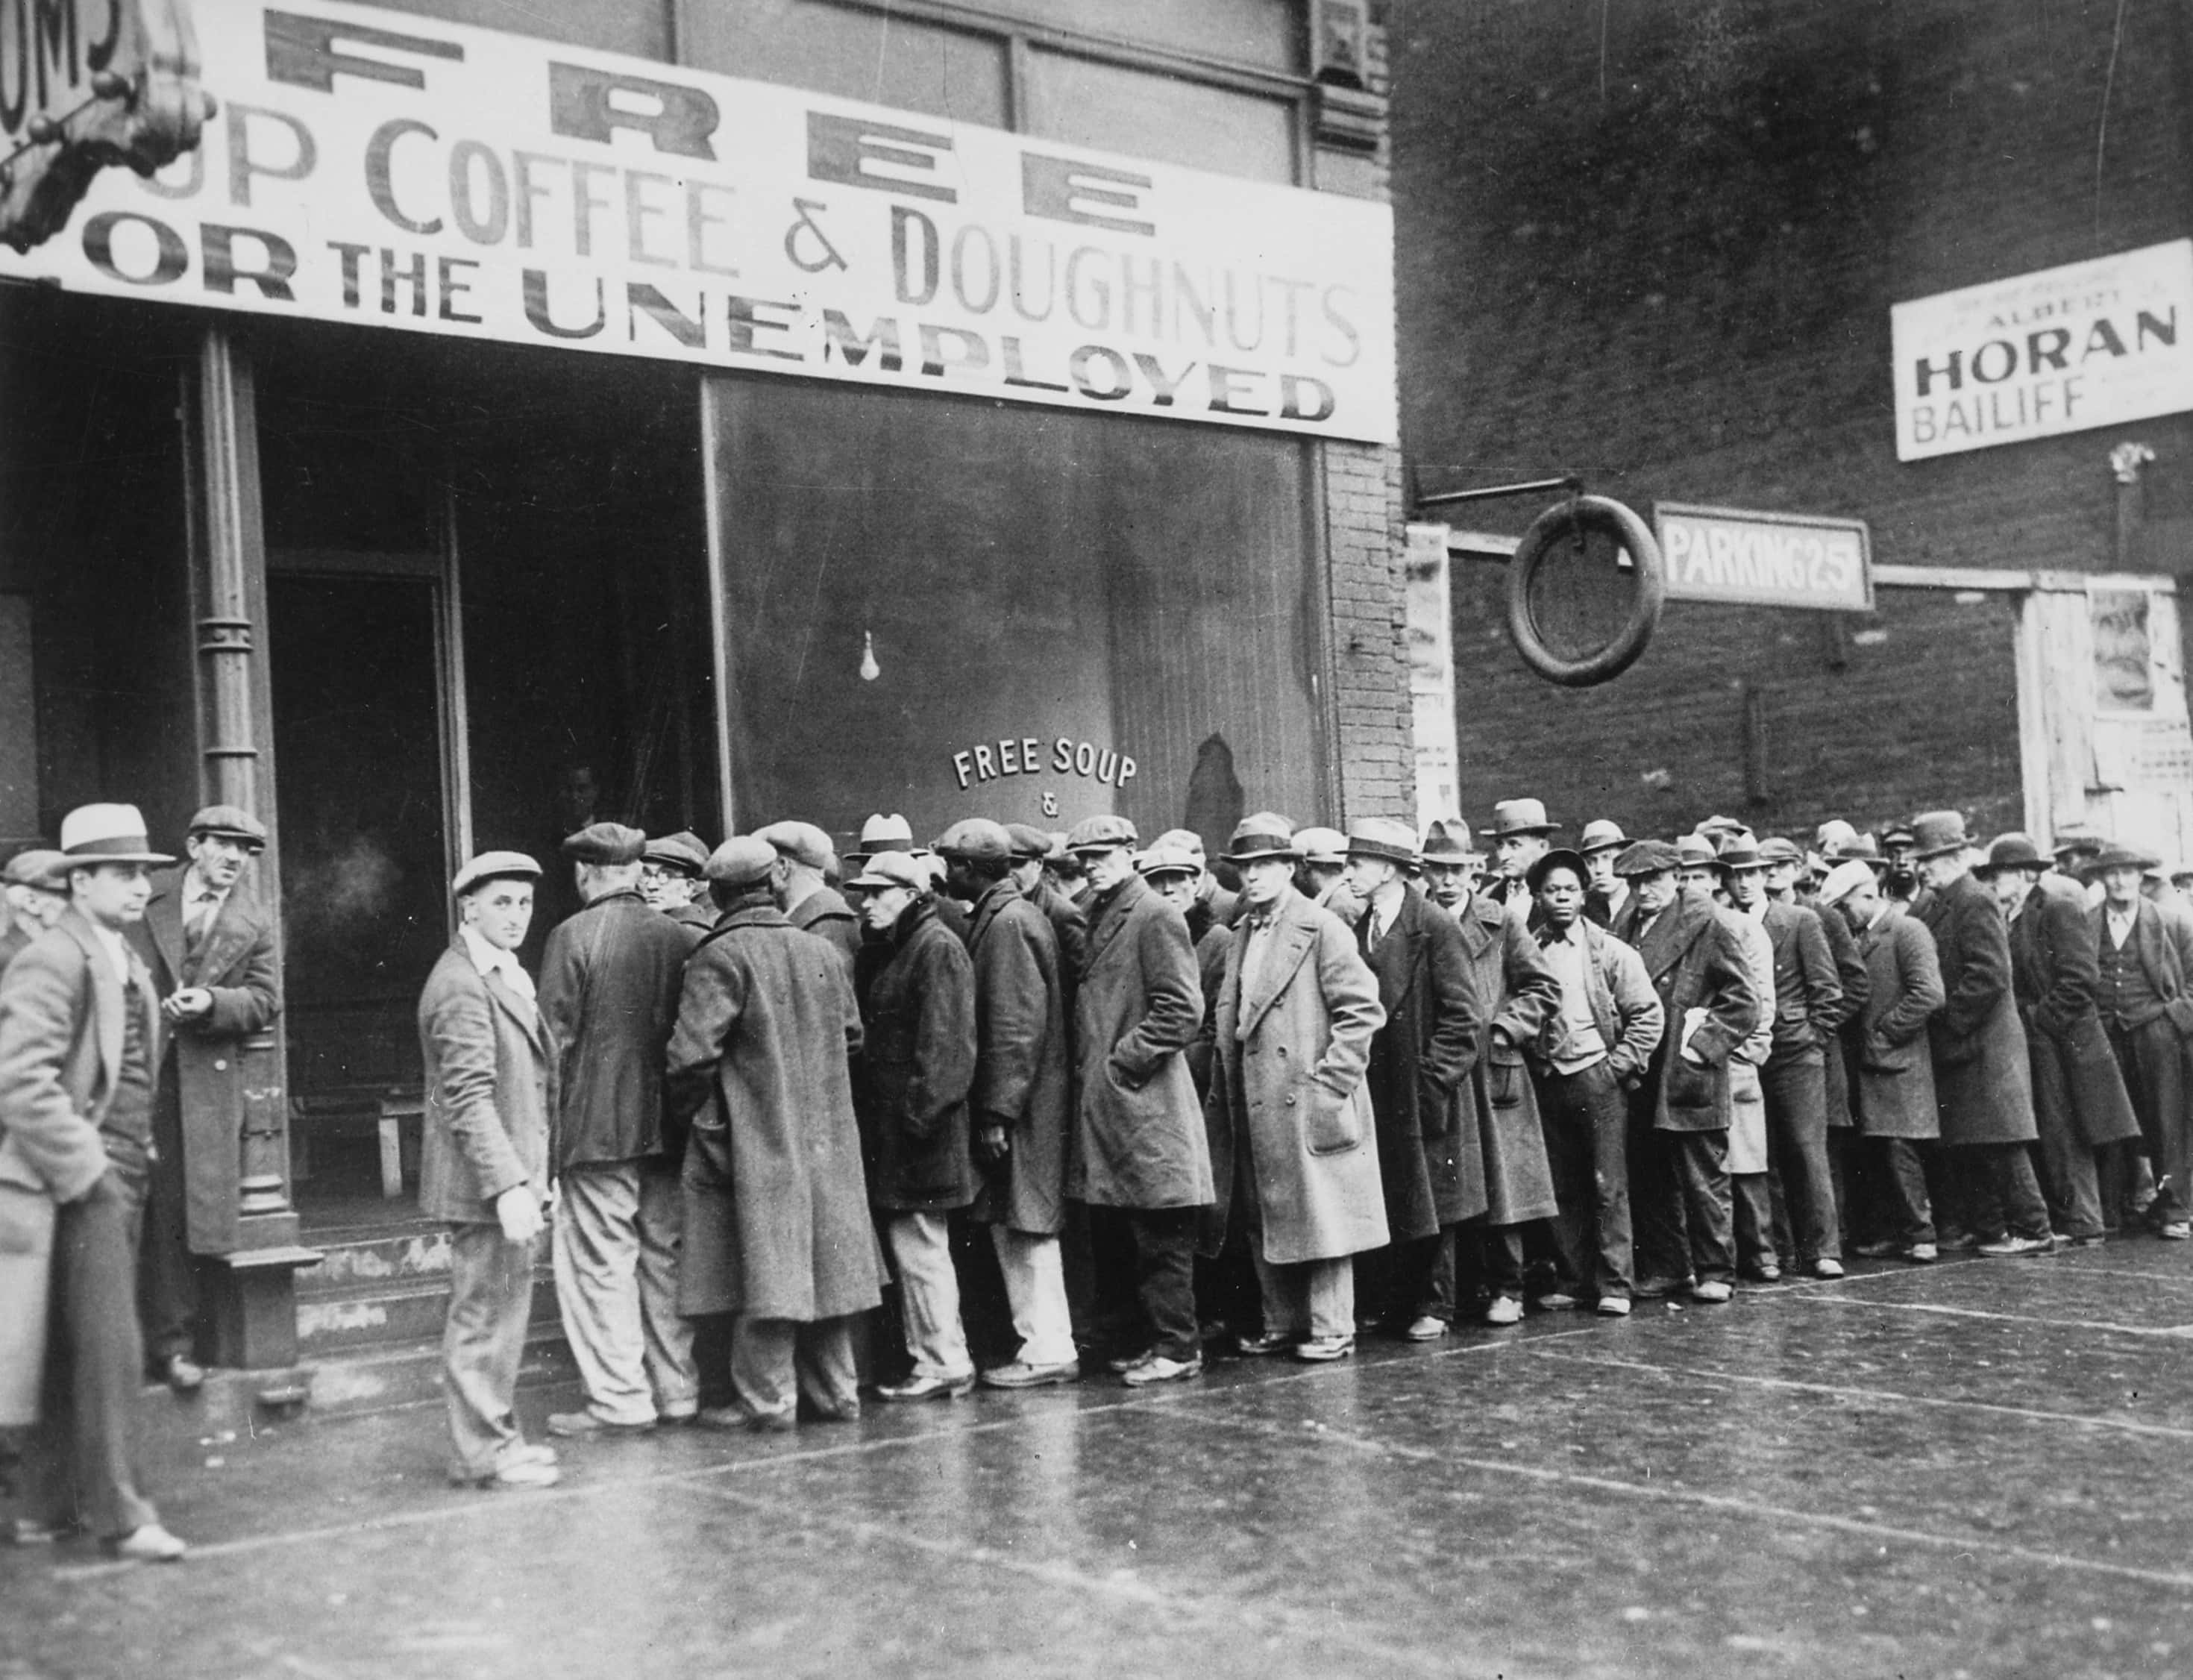 The Great Depression facts